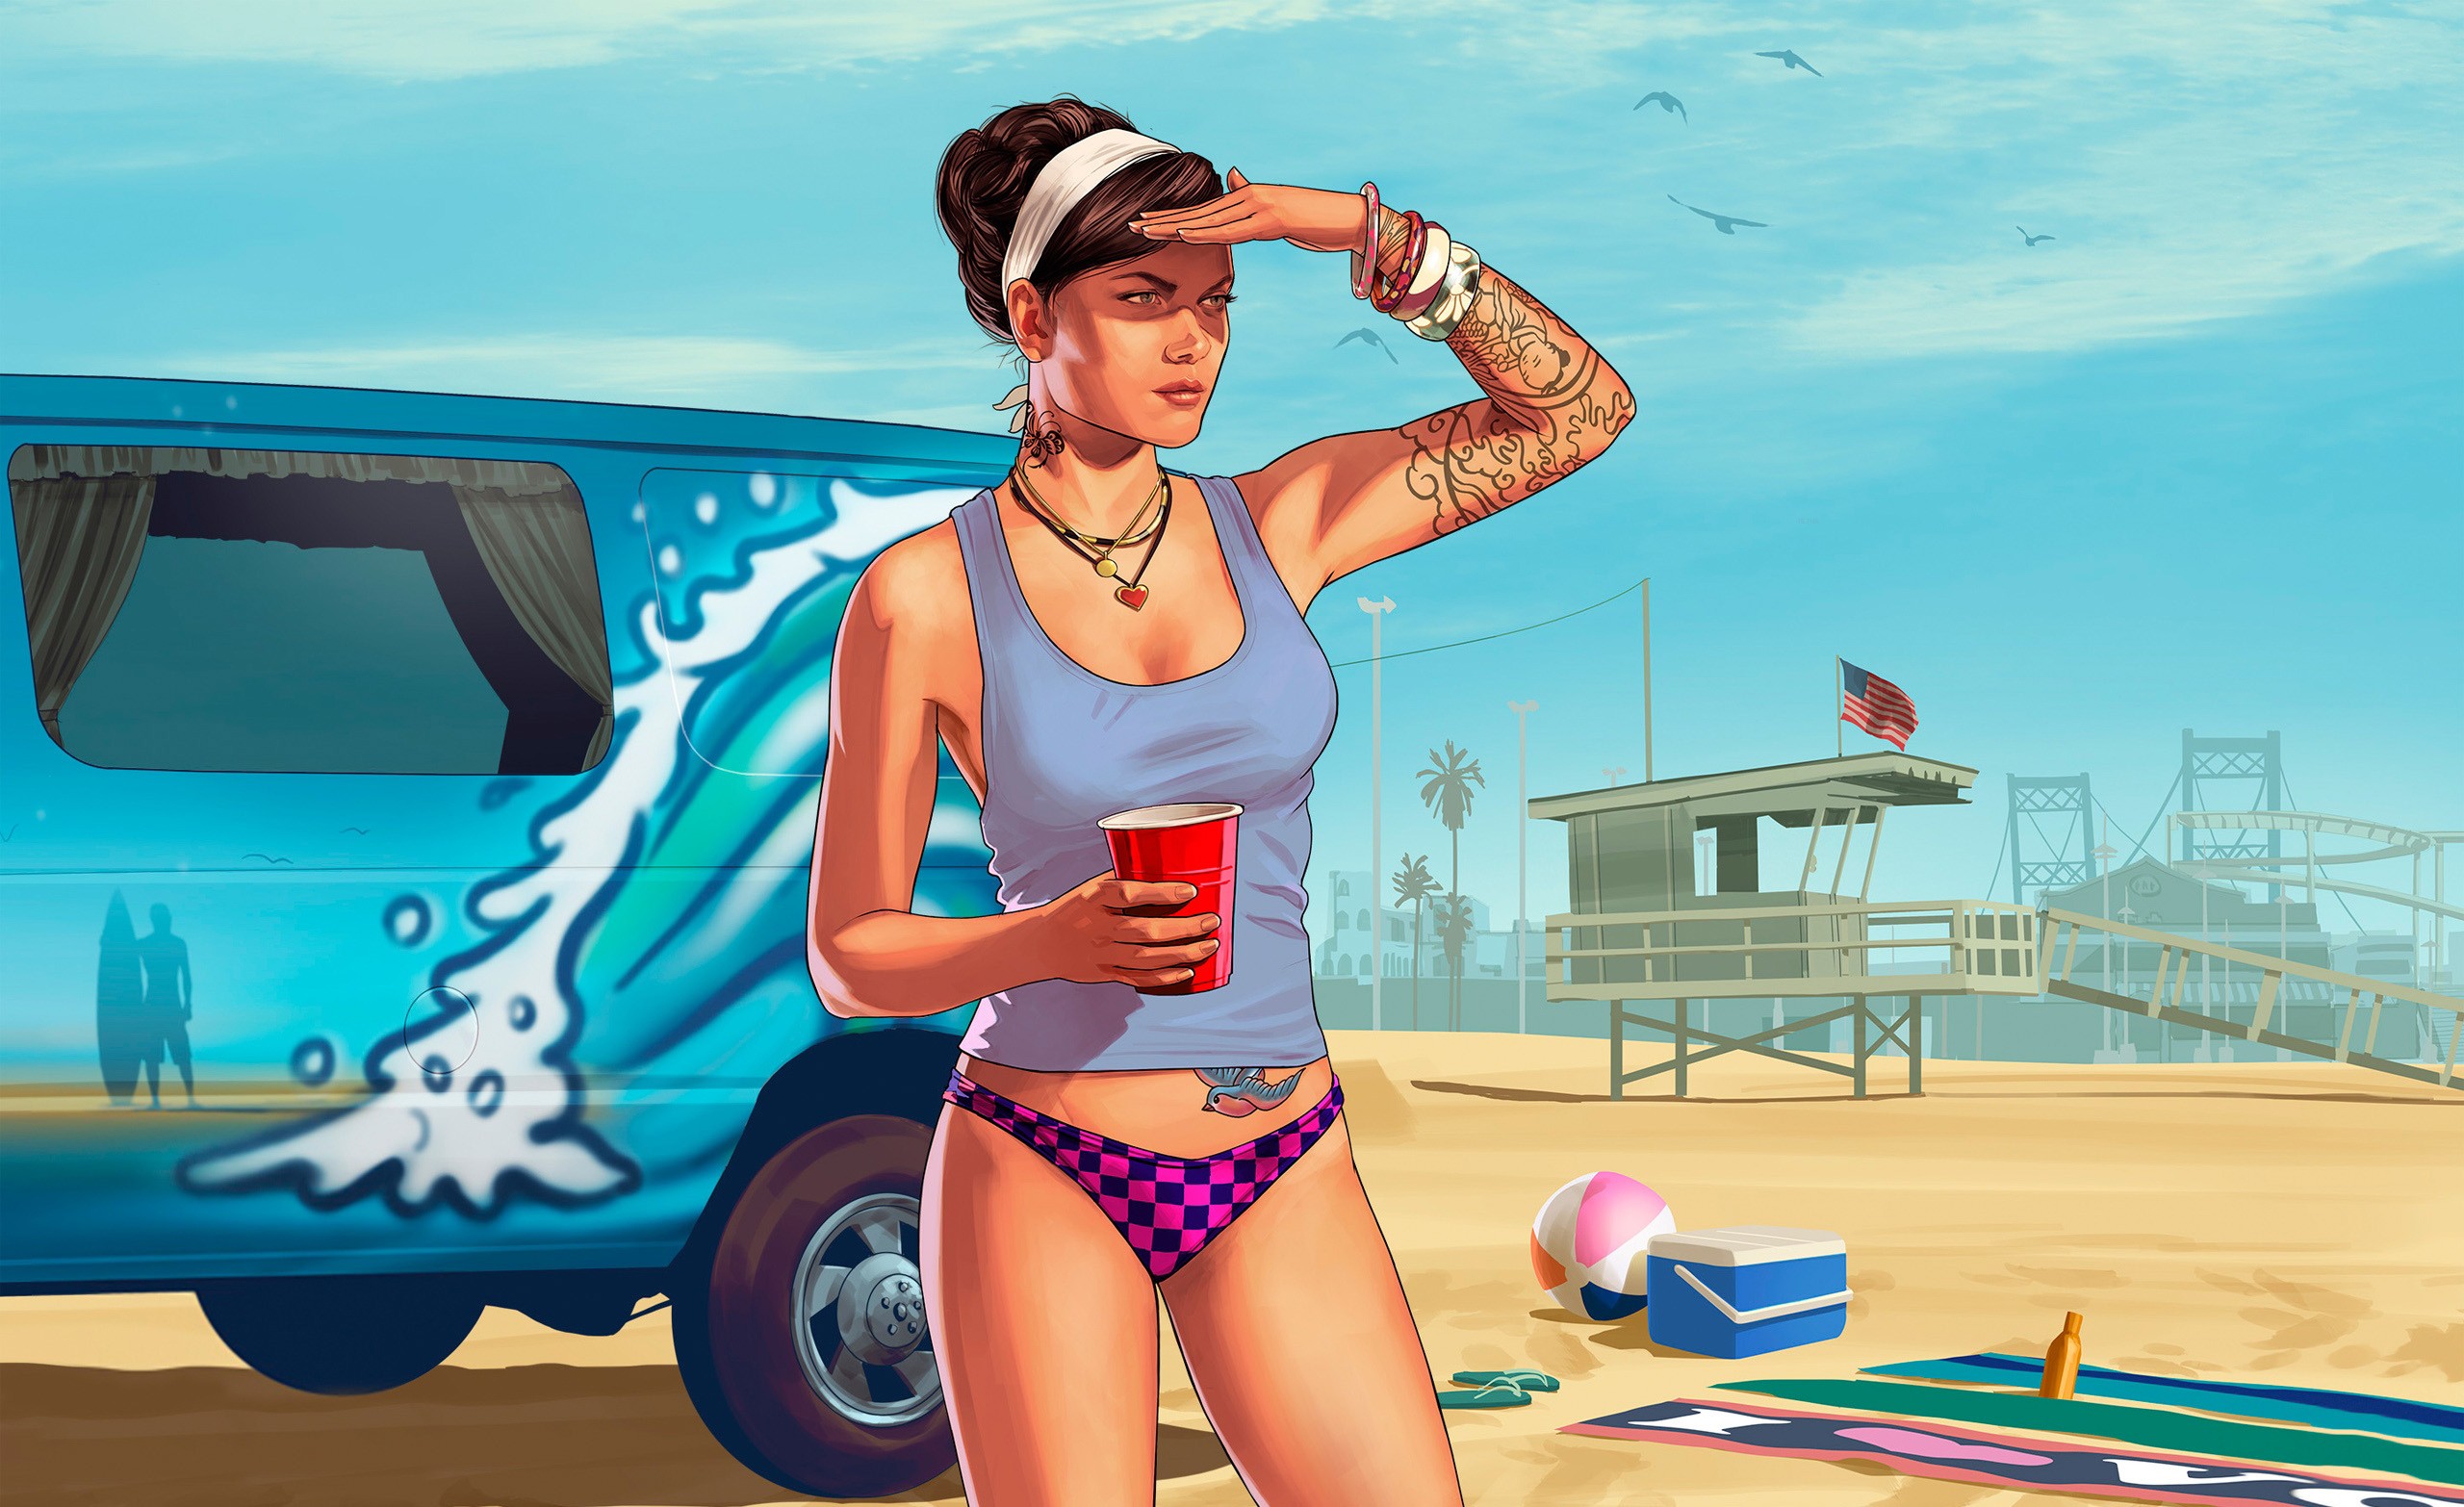 General 2560x1566 Grand Theft Auto V Grand Theft Auto video games PC gaming beach women bikini video game art Rockstar Games bikini bottoms looking into the distance inked girls necklace car vehicle brunette women with cars women on beach video game girls